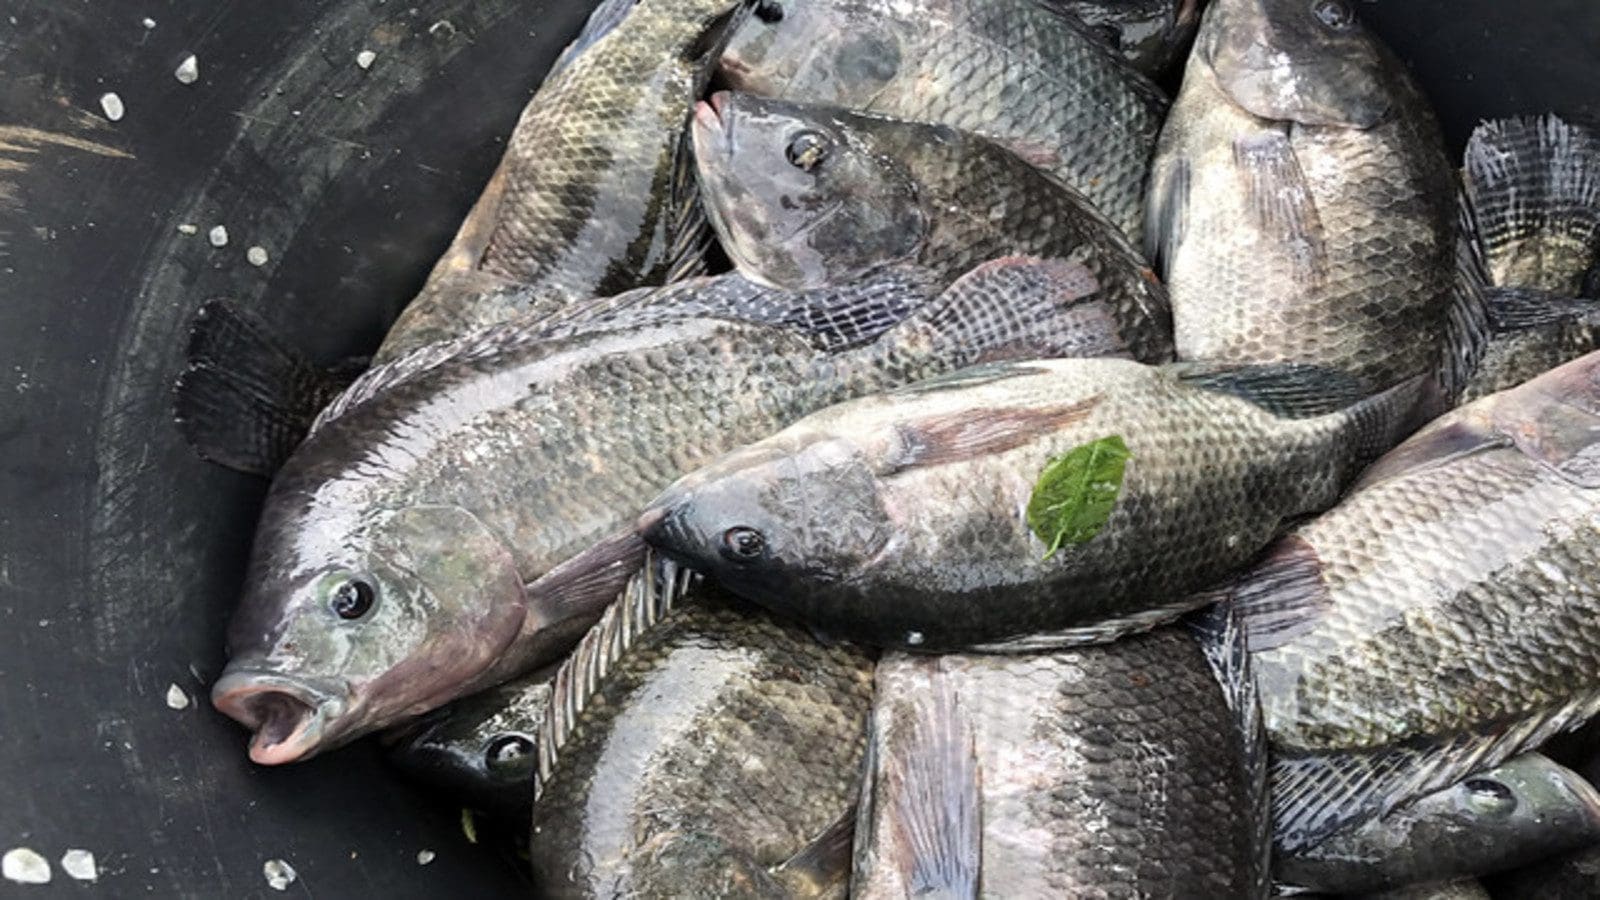 Fish from Lake Nakuru deemed unfit for human consumption, warning issued